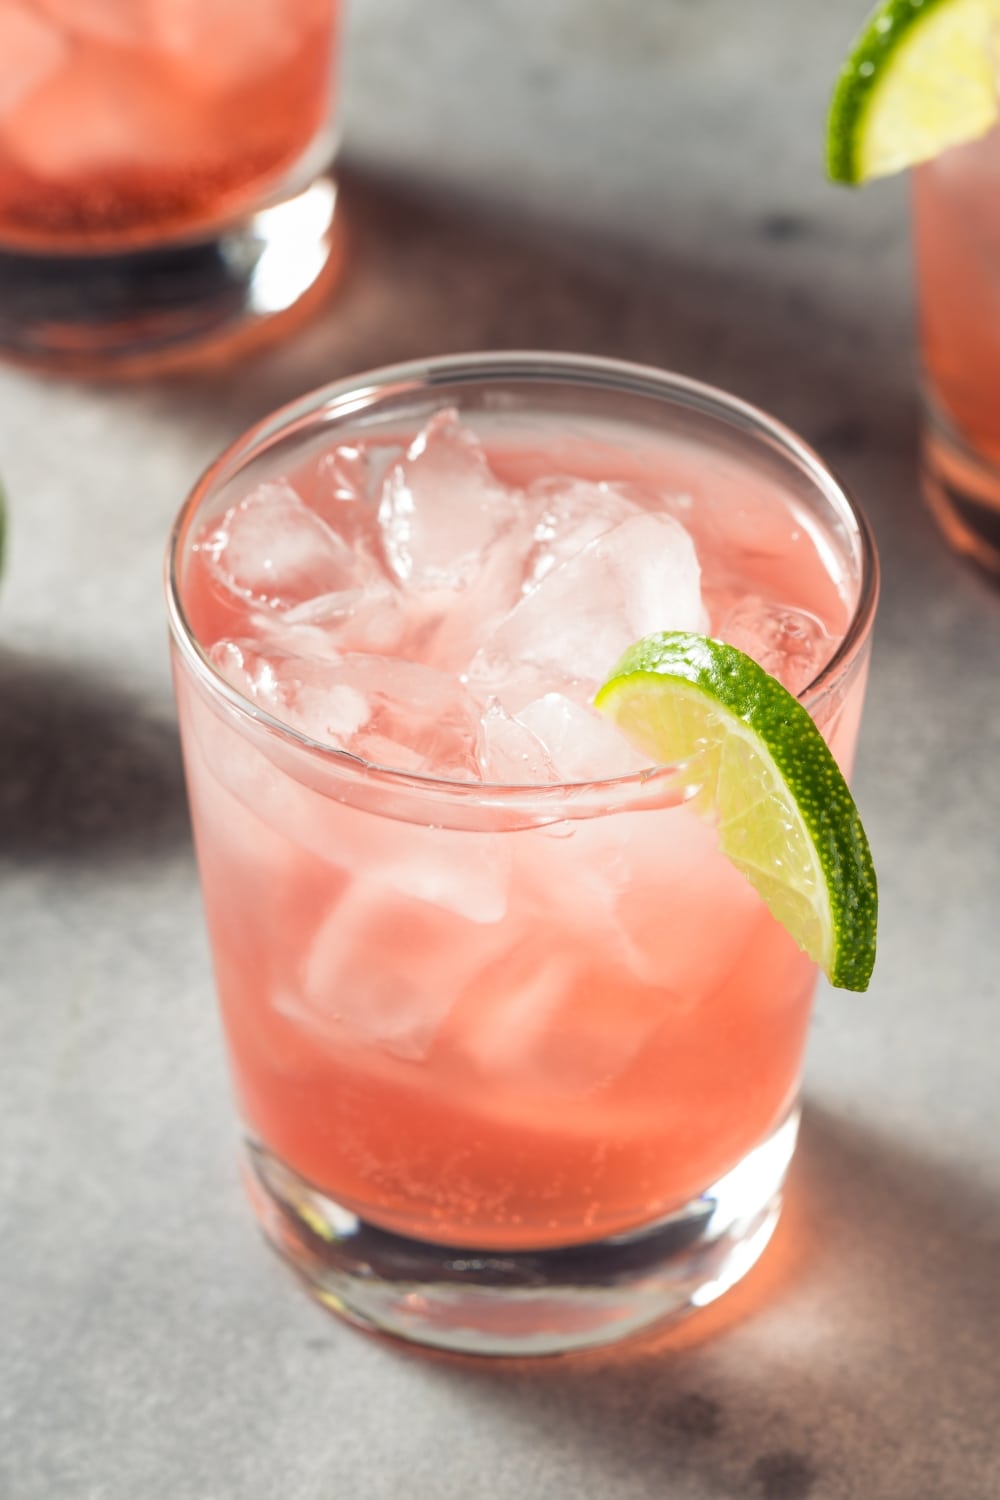 Glass of Iced Refreshing Vodka Cranberry Punch Garnish with Lime